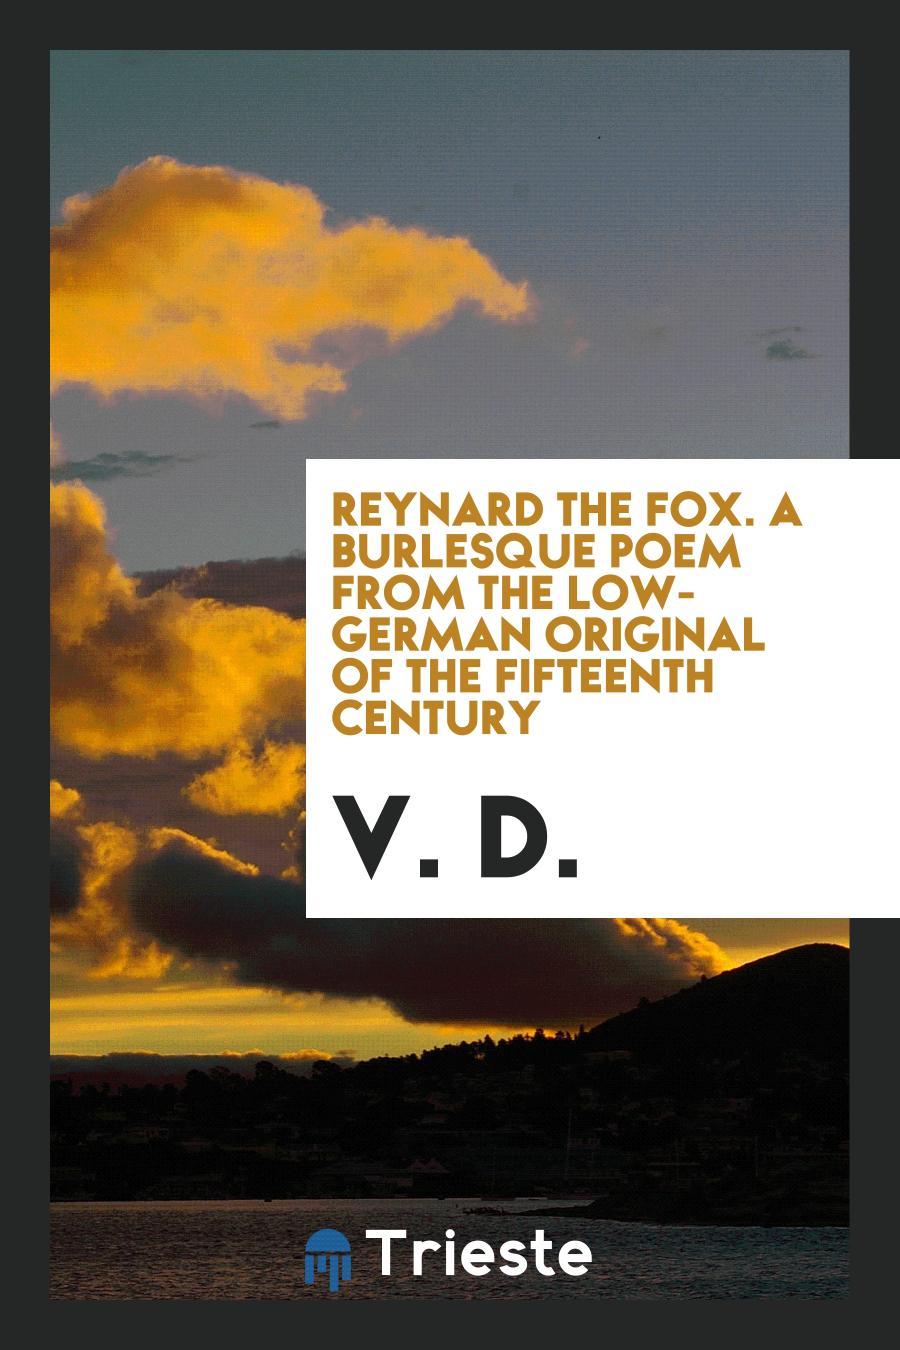 Reynard the Fox. A burlesque poem from the Low-German original of the fifteenth century